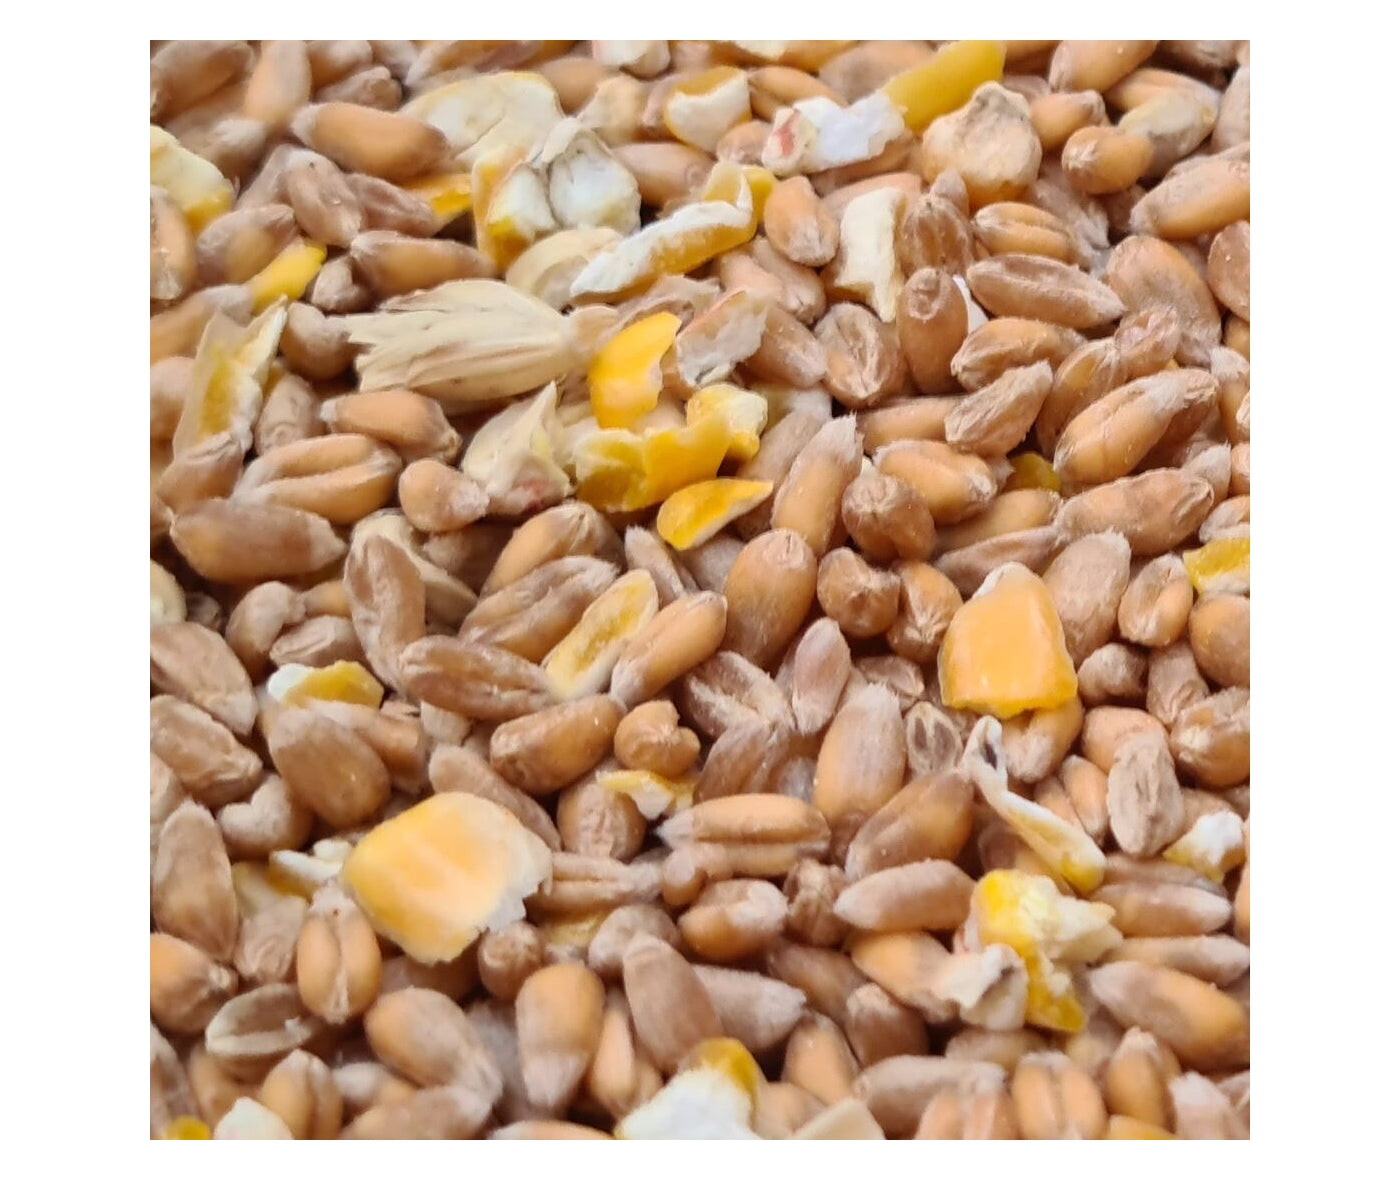 The Organic Feed Co. - Organic Mixed Corn 5kg - Buy Online SPR Centre UK